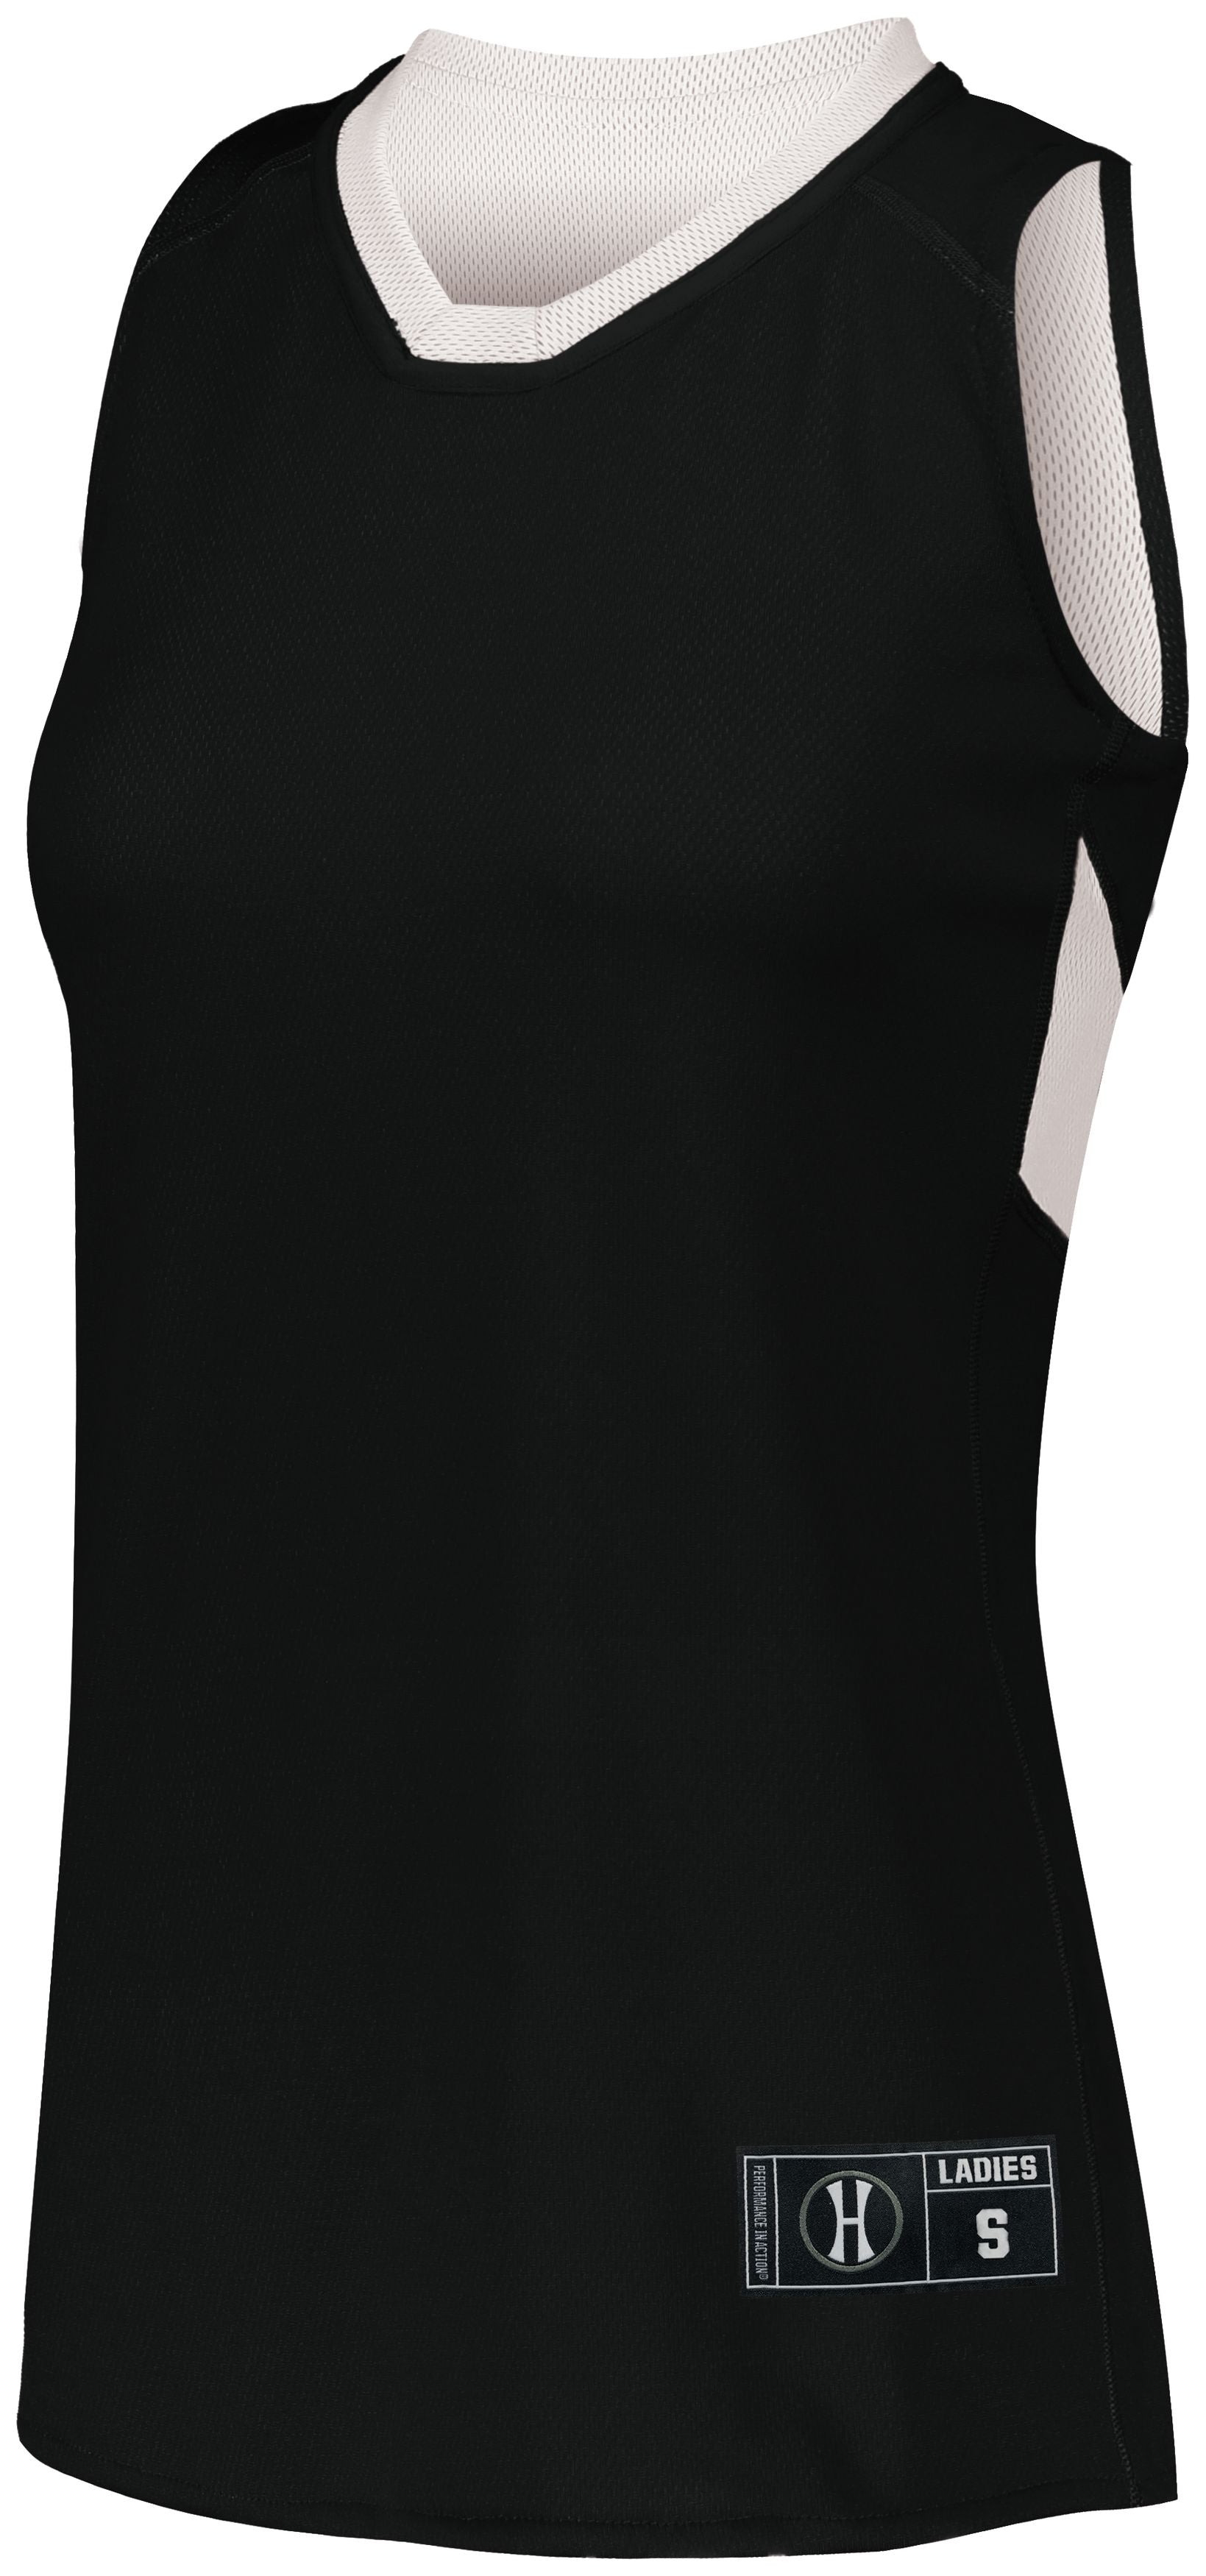 Ladies Dual-Side Single Ply Basketball Jersey 224378